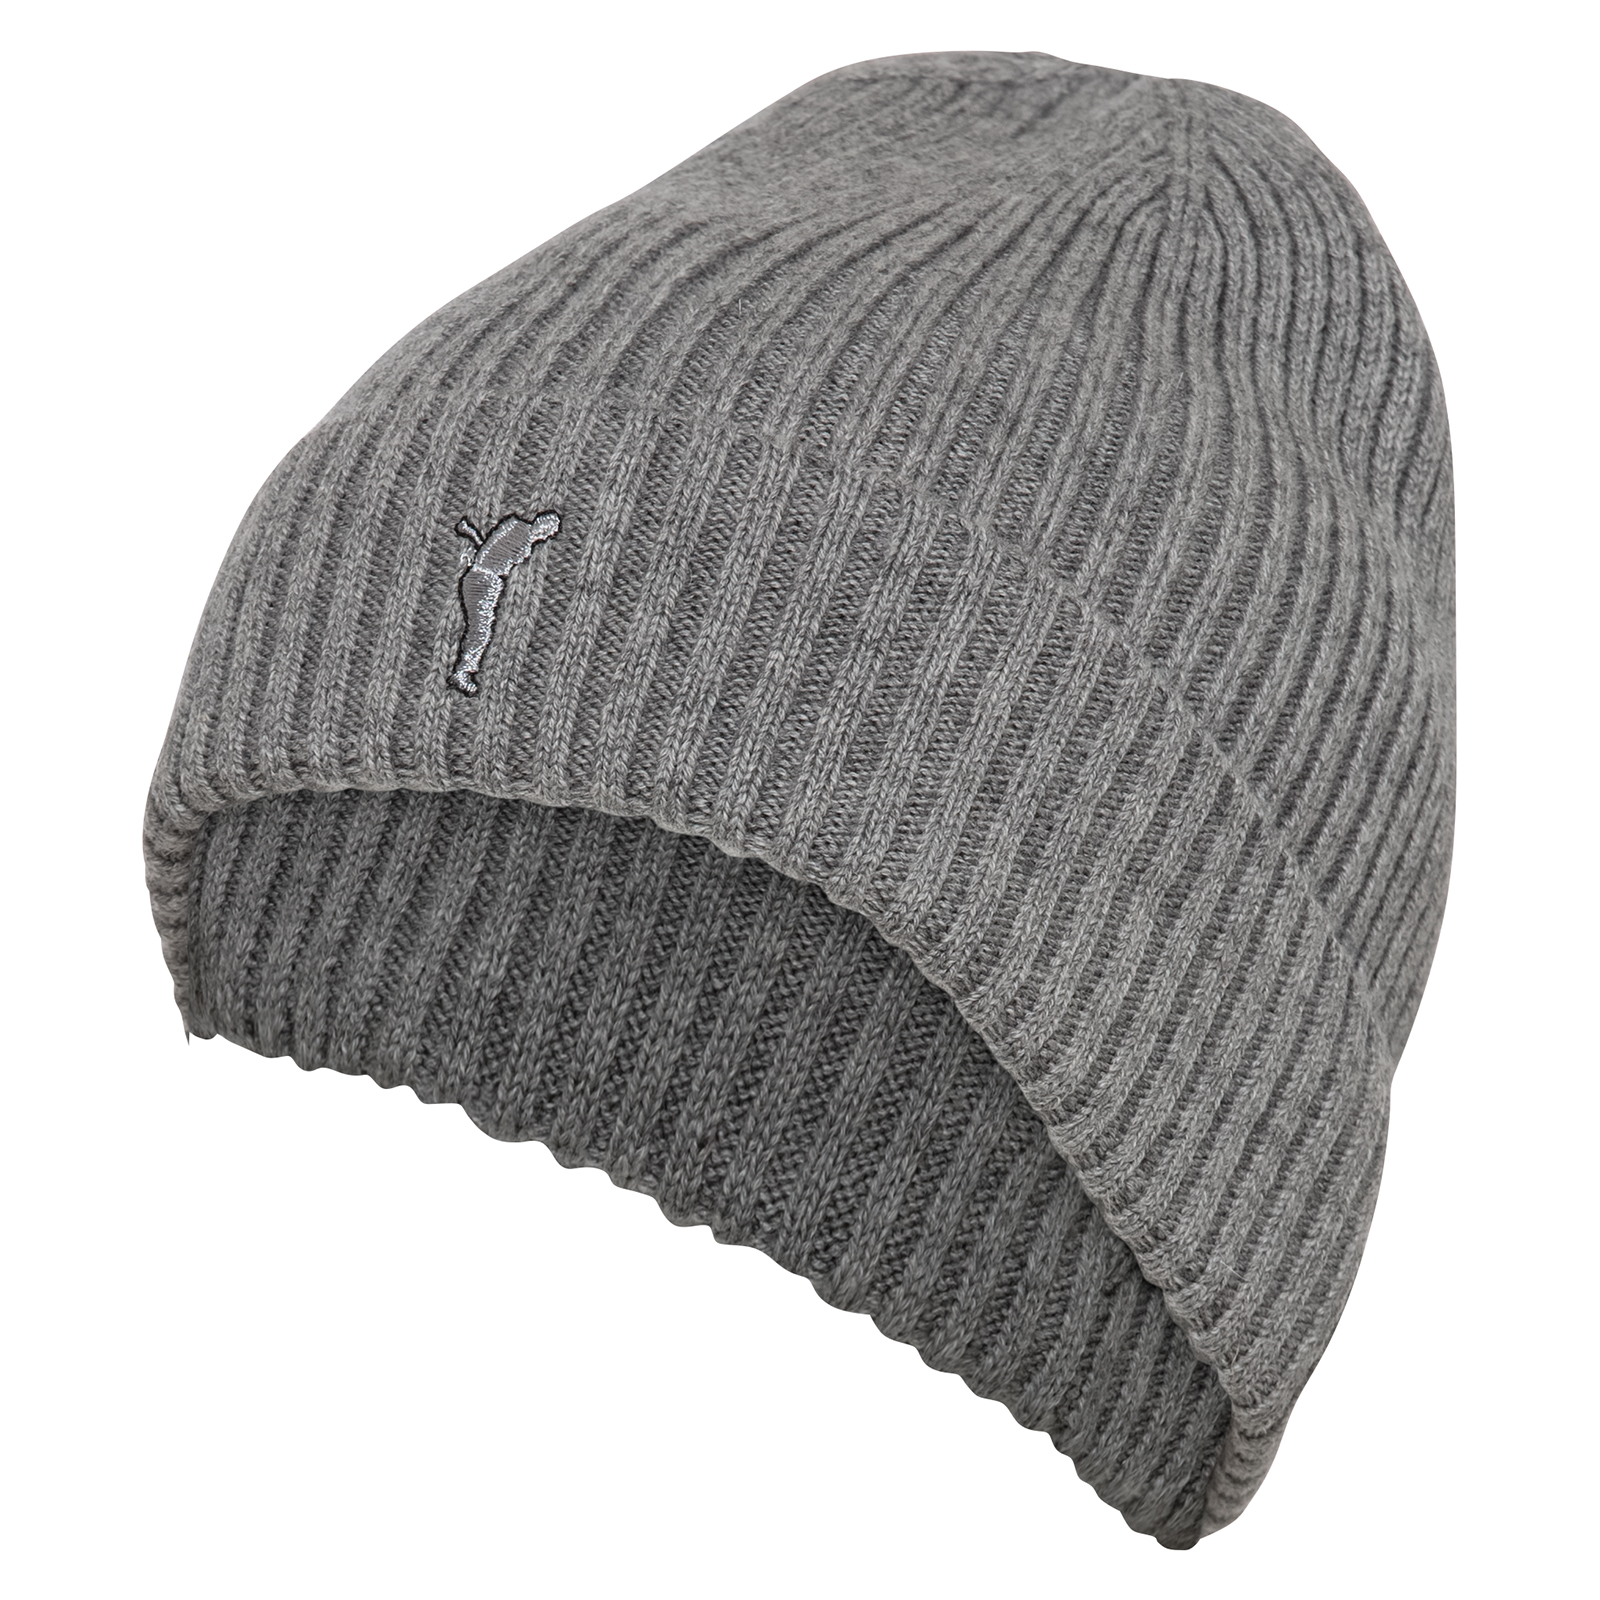 Men's sporty knitted golf hat 